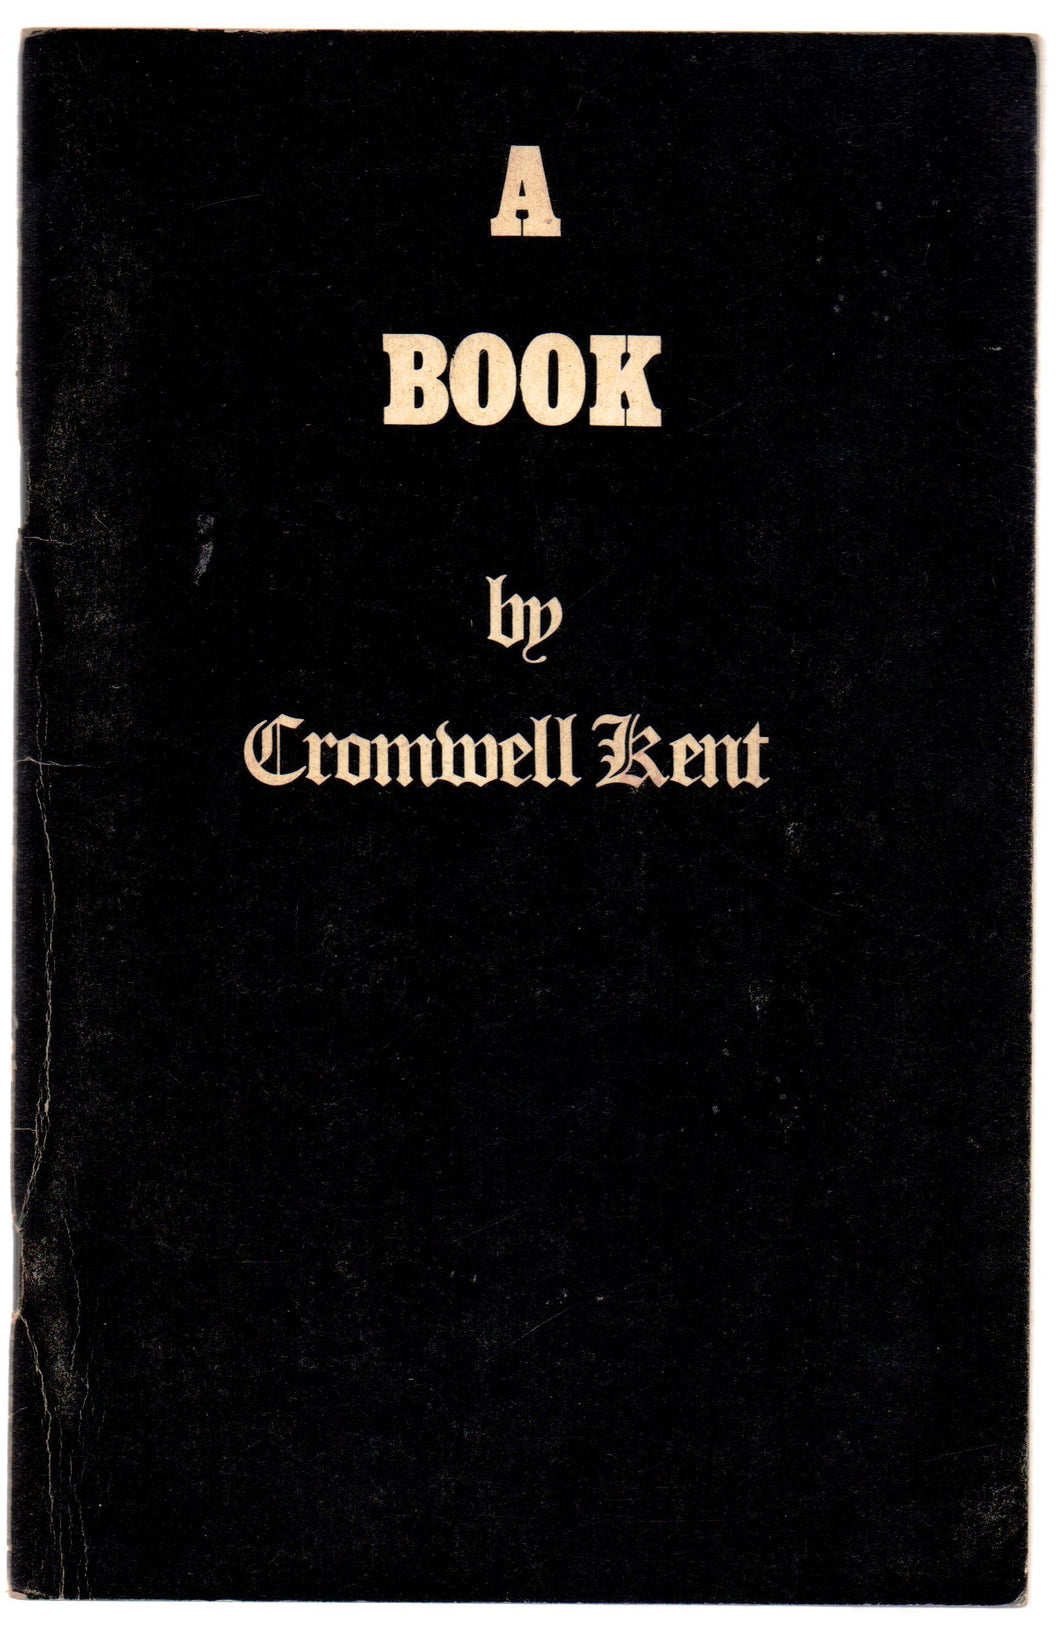 A Book by Cromwell Kent